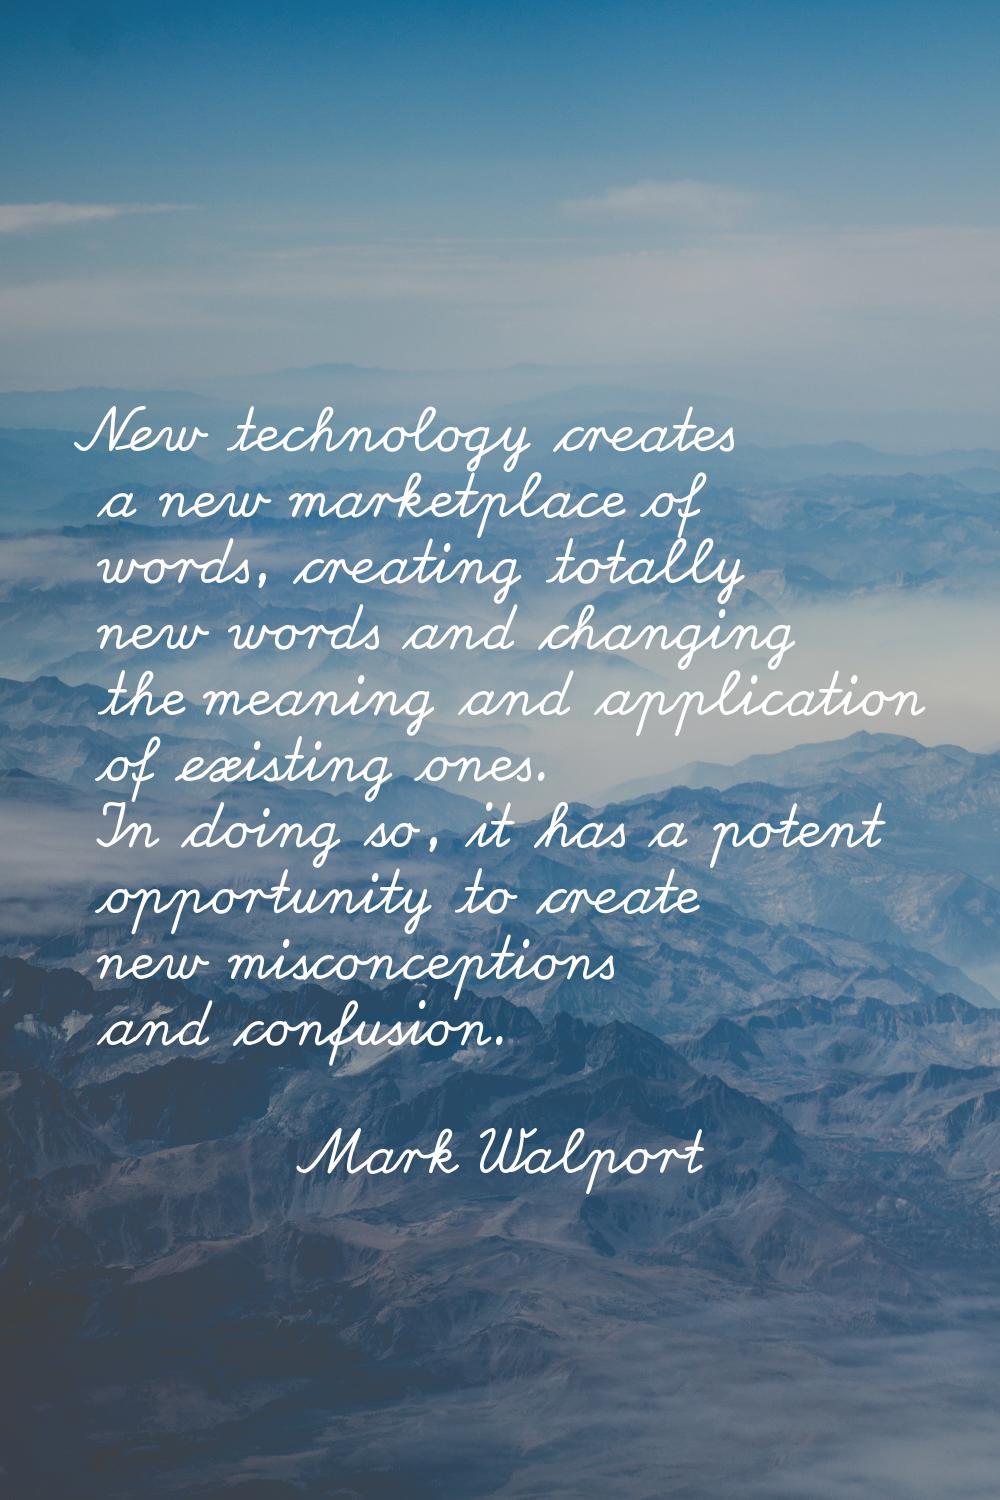 New technology creates a new marketplace of words, creating totally new words and changing the mean